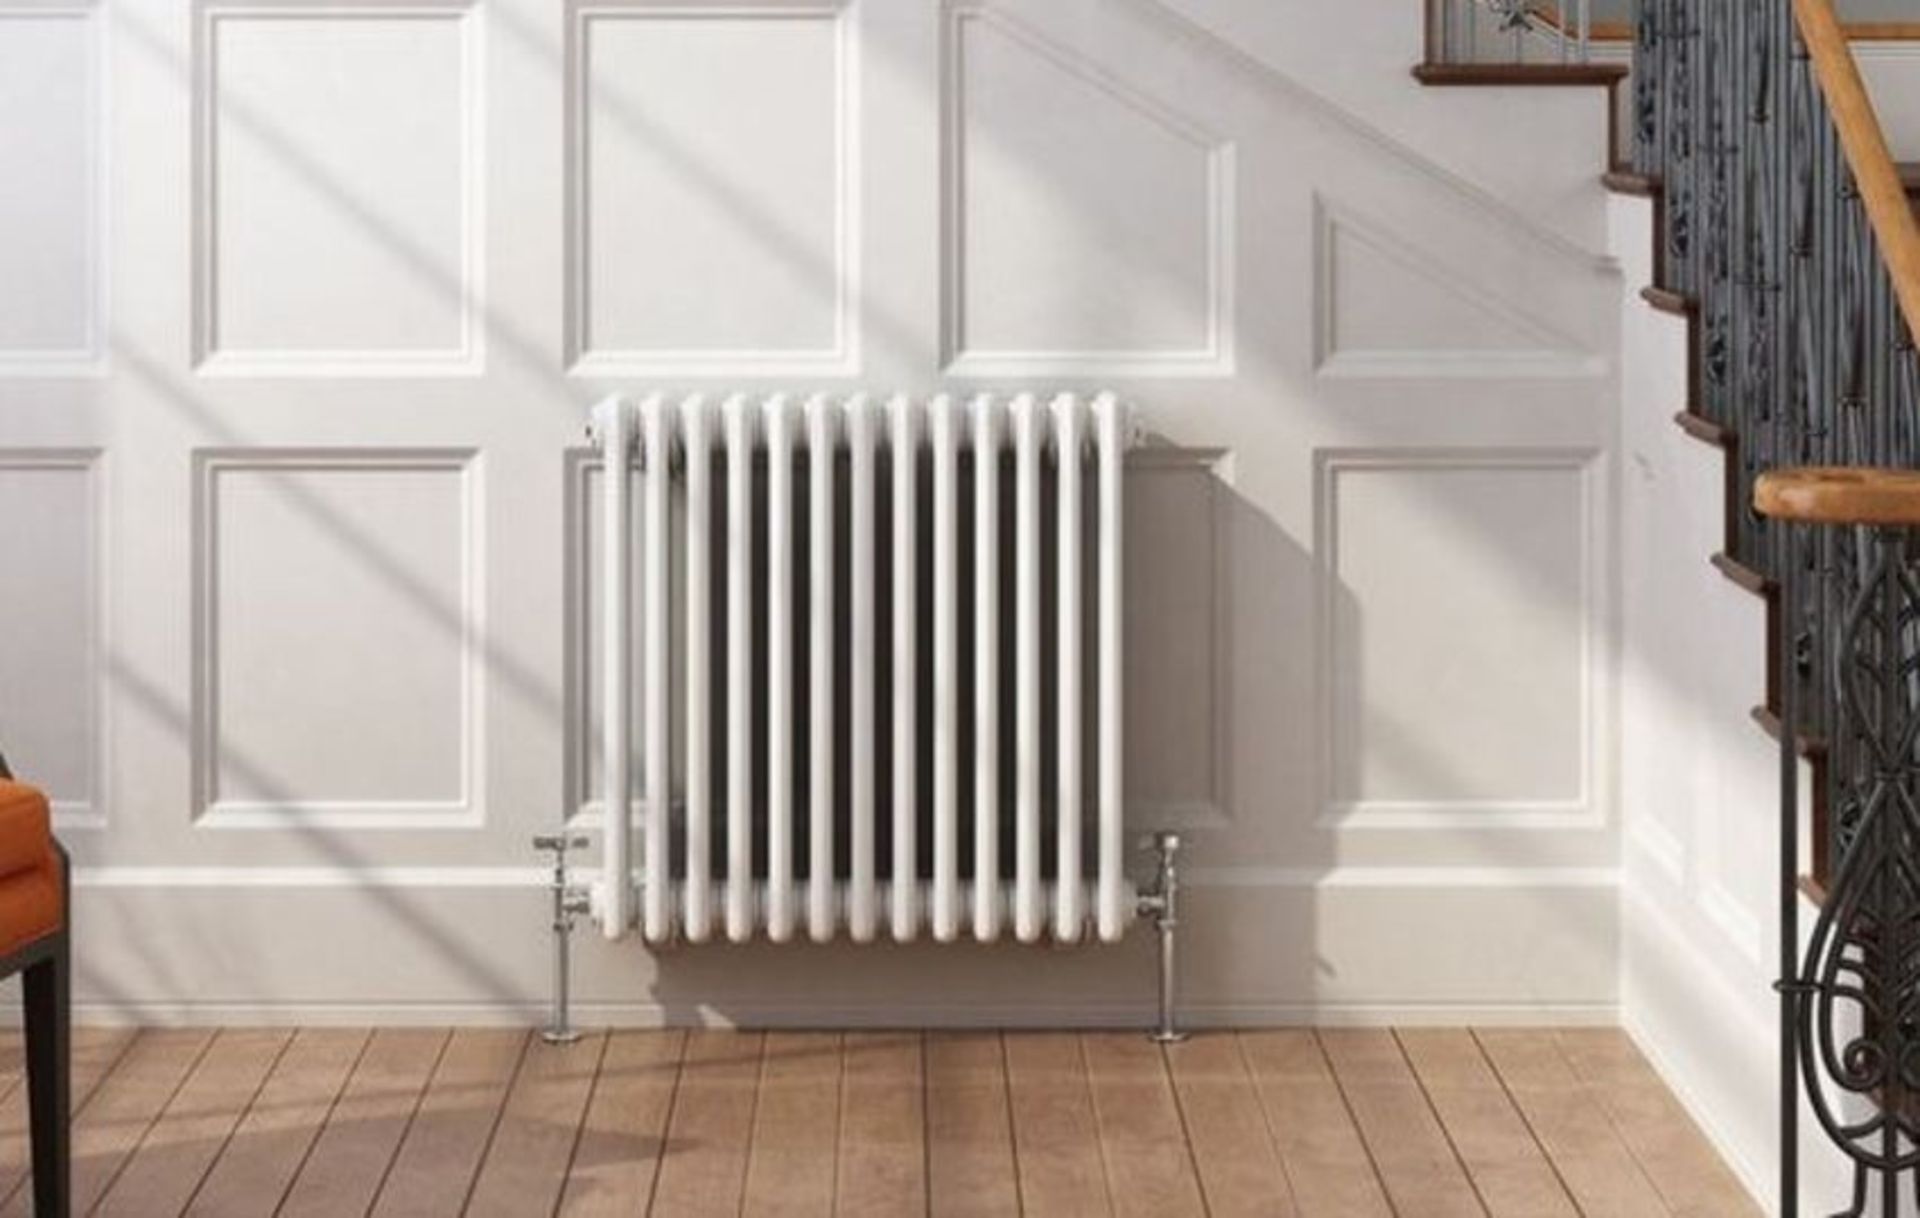 New (R66) 500x628mm White Double Panel Horizontal Colosseum Traditional Radiator.RRP £444.99.F... - Image 2 of 2